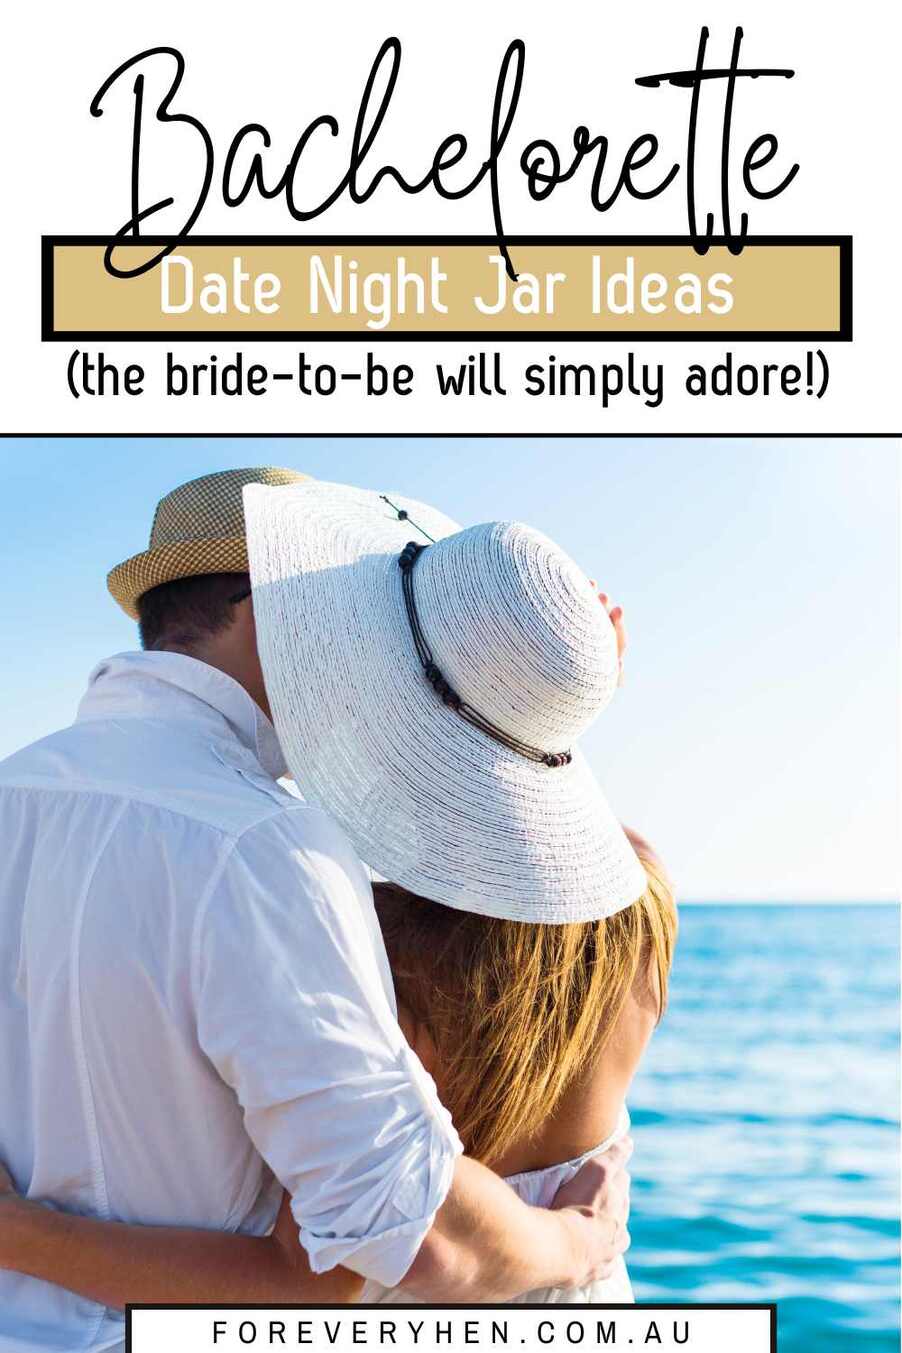 Couple hugging at the beach. Text overlay: Bachelorette date night jar ideas (the bride-to-be will simply adore!)